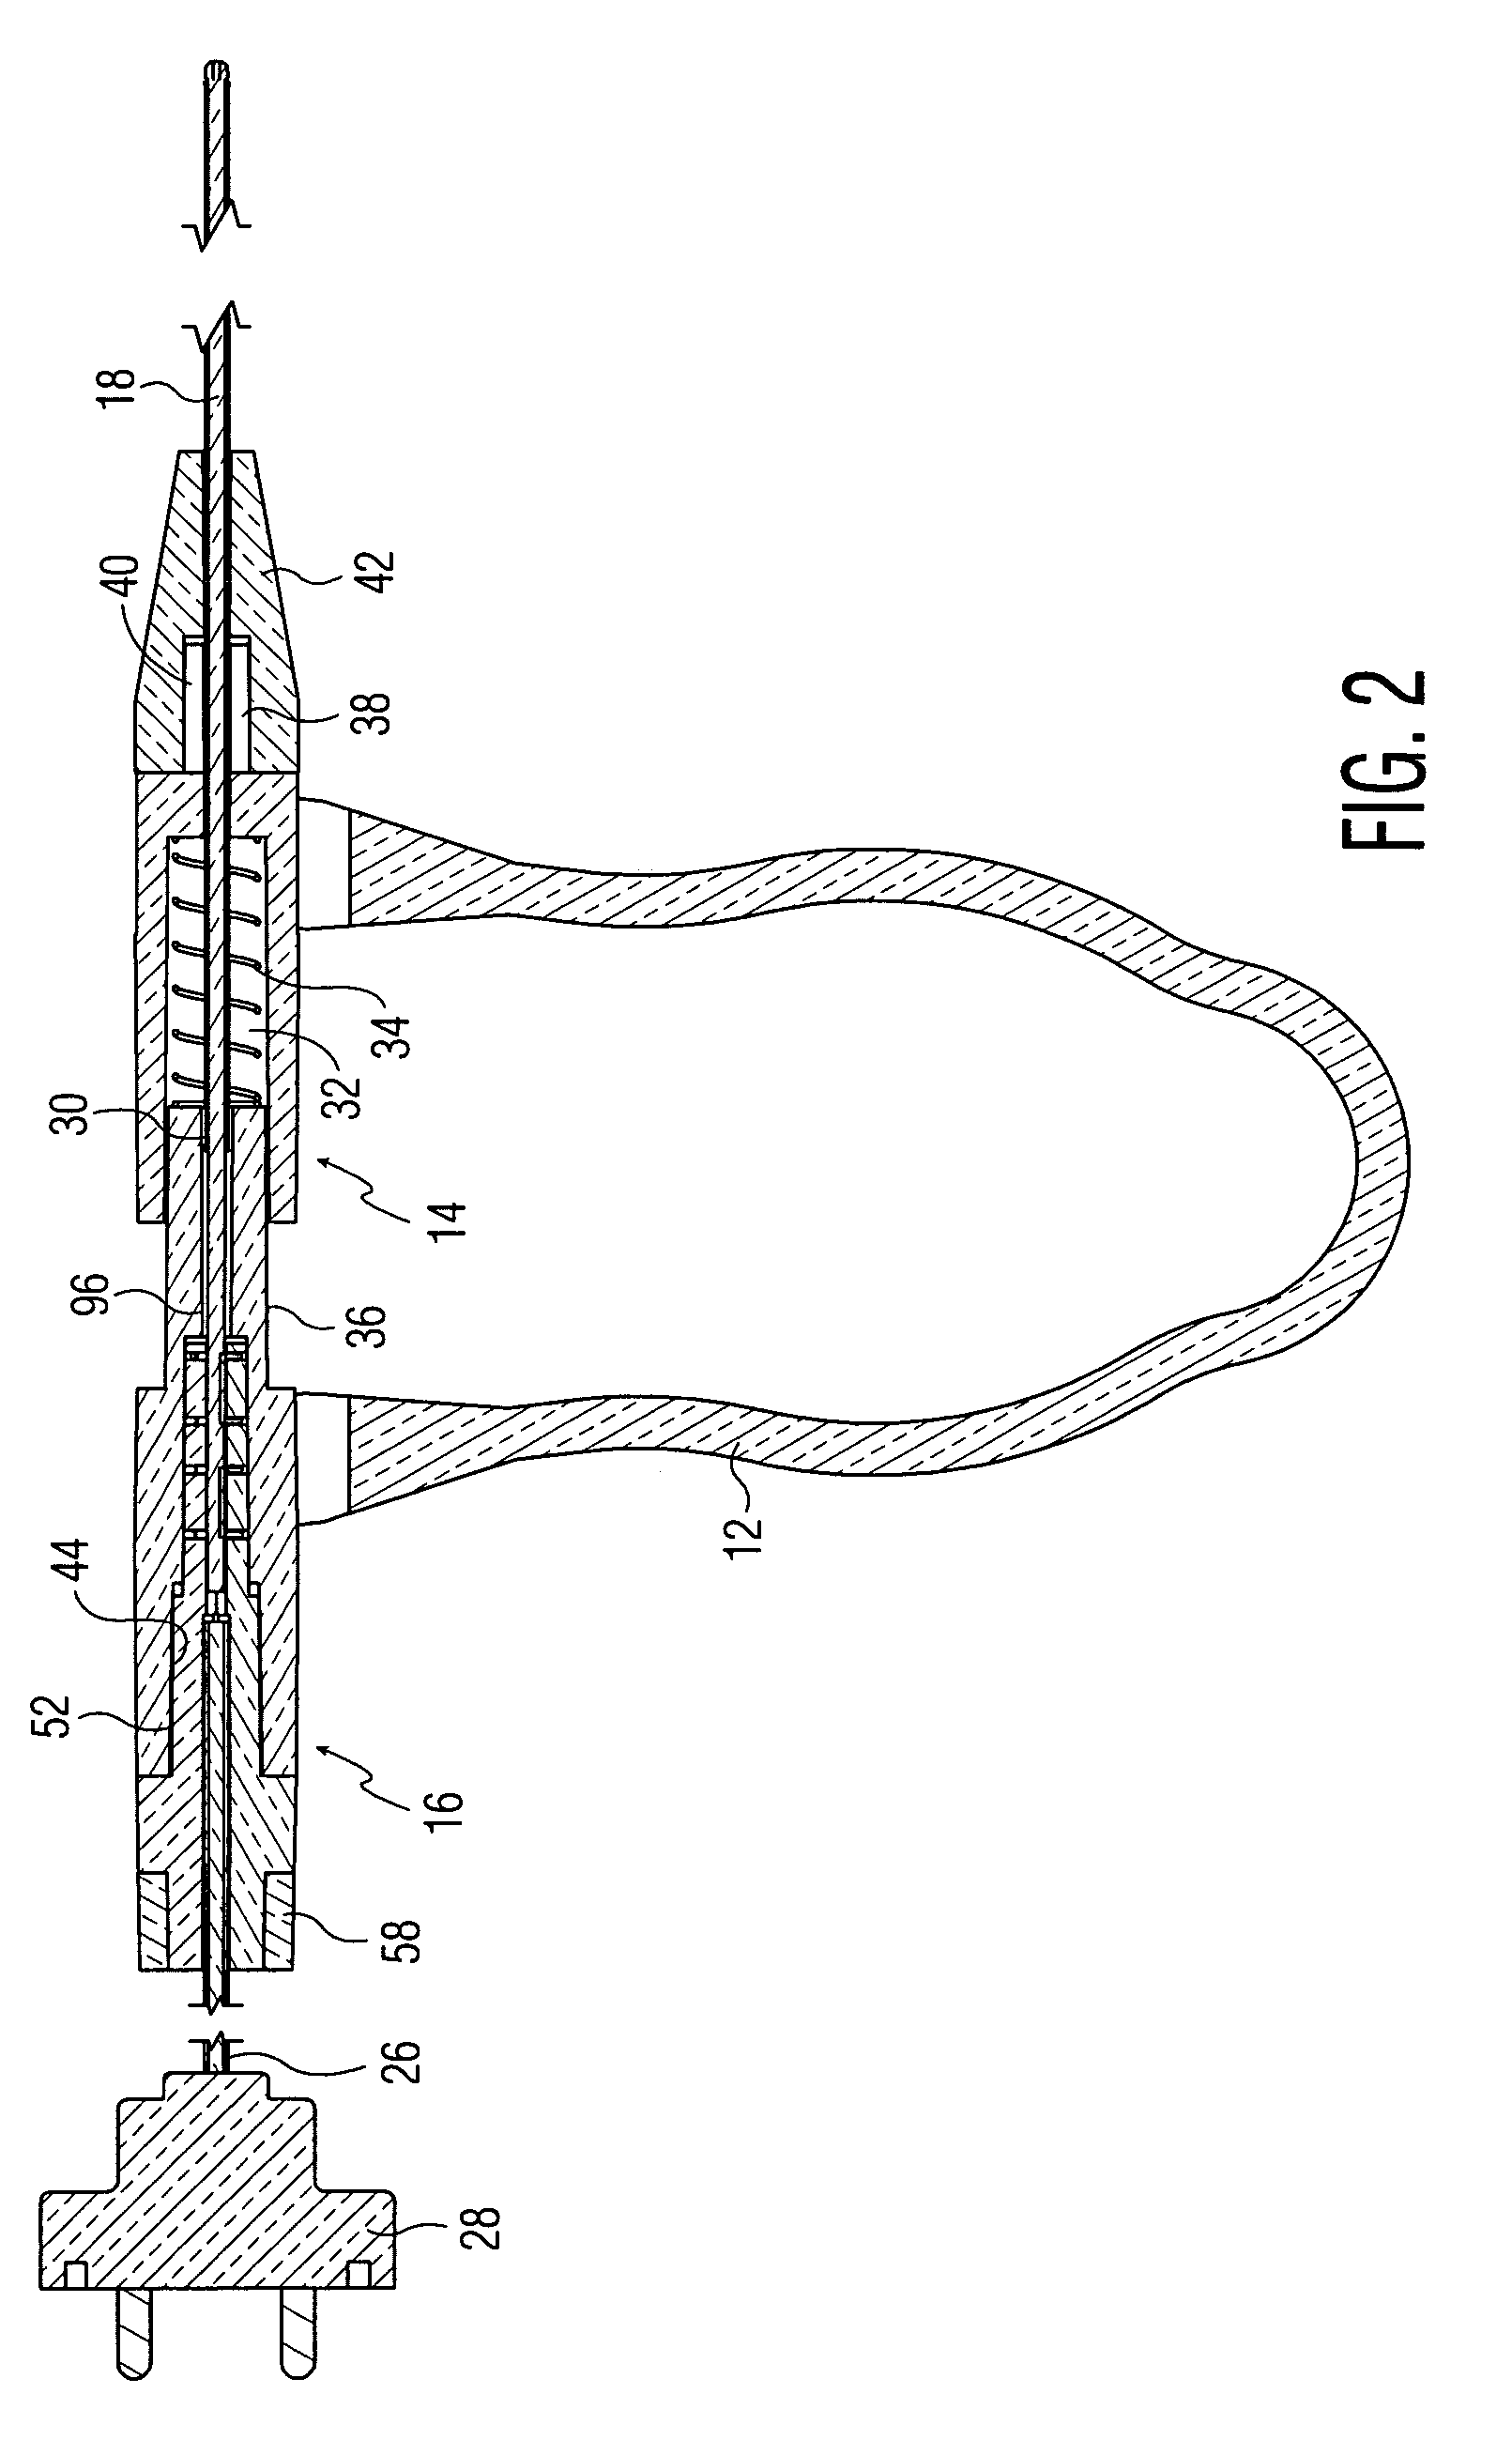 Disposable electrosurgical handpiece for treating tissue